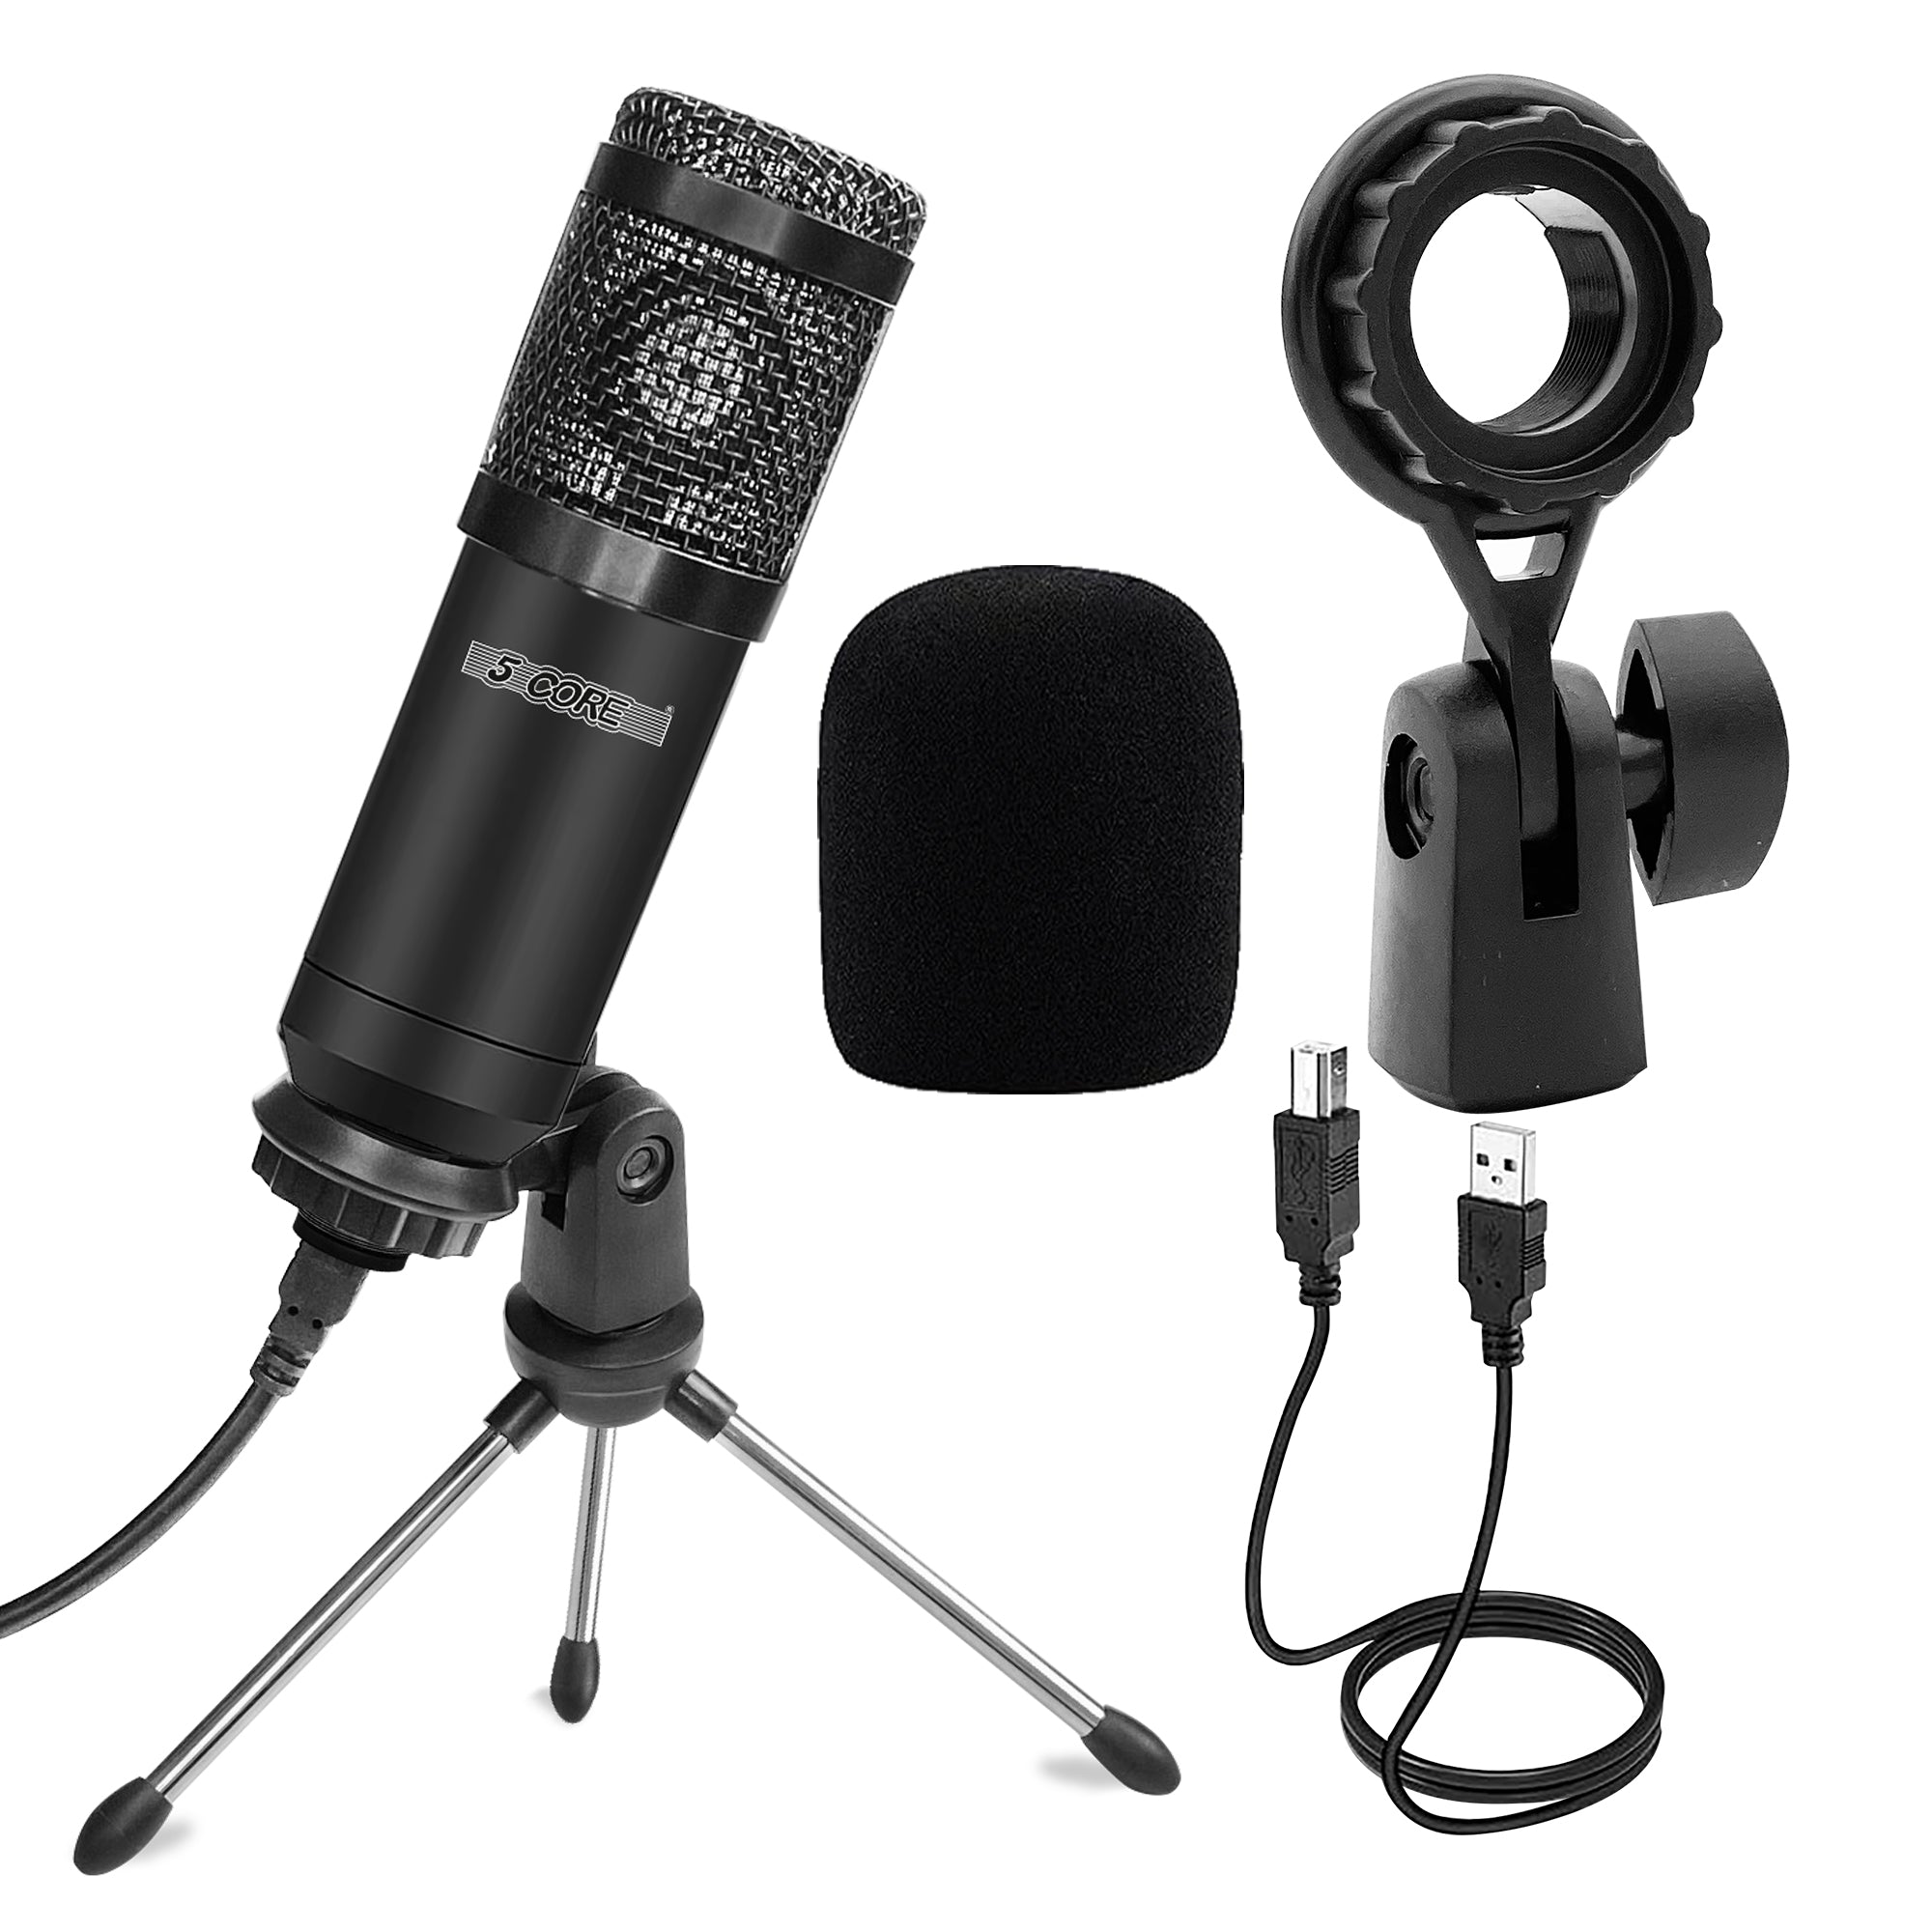 Podcast microphones Under 2000: Top Rated Podcast Microphones